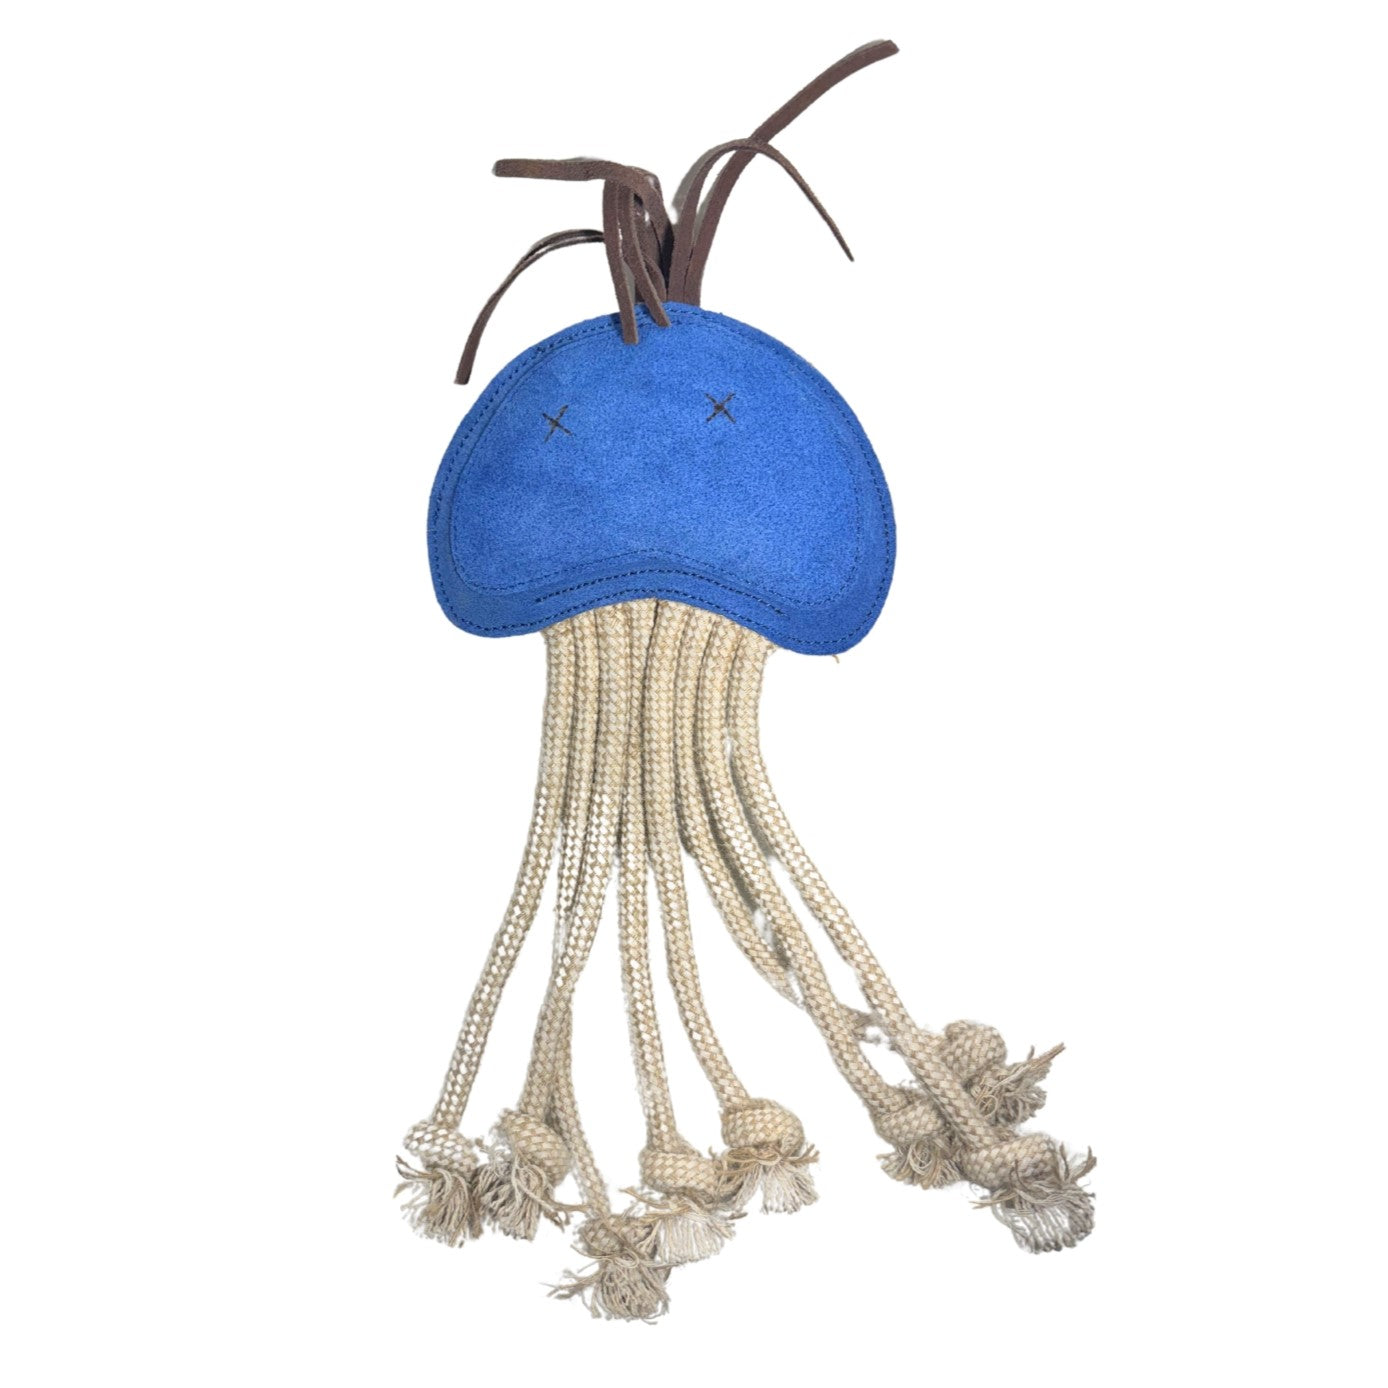 A blue Joe Jellyfish - storm cat toy with a soft, plush top and dangling cream-colored rope tentacles, each ending in a knotted tassel. The toy has stitched x-shaped eyes and brown Buffalo Suede ribbons at the top.